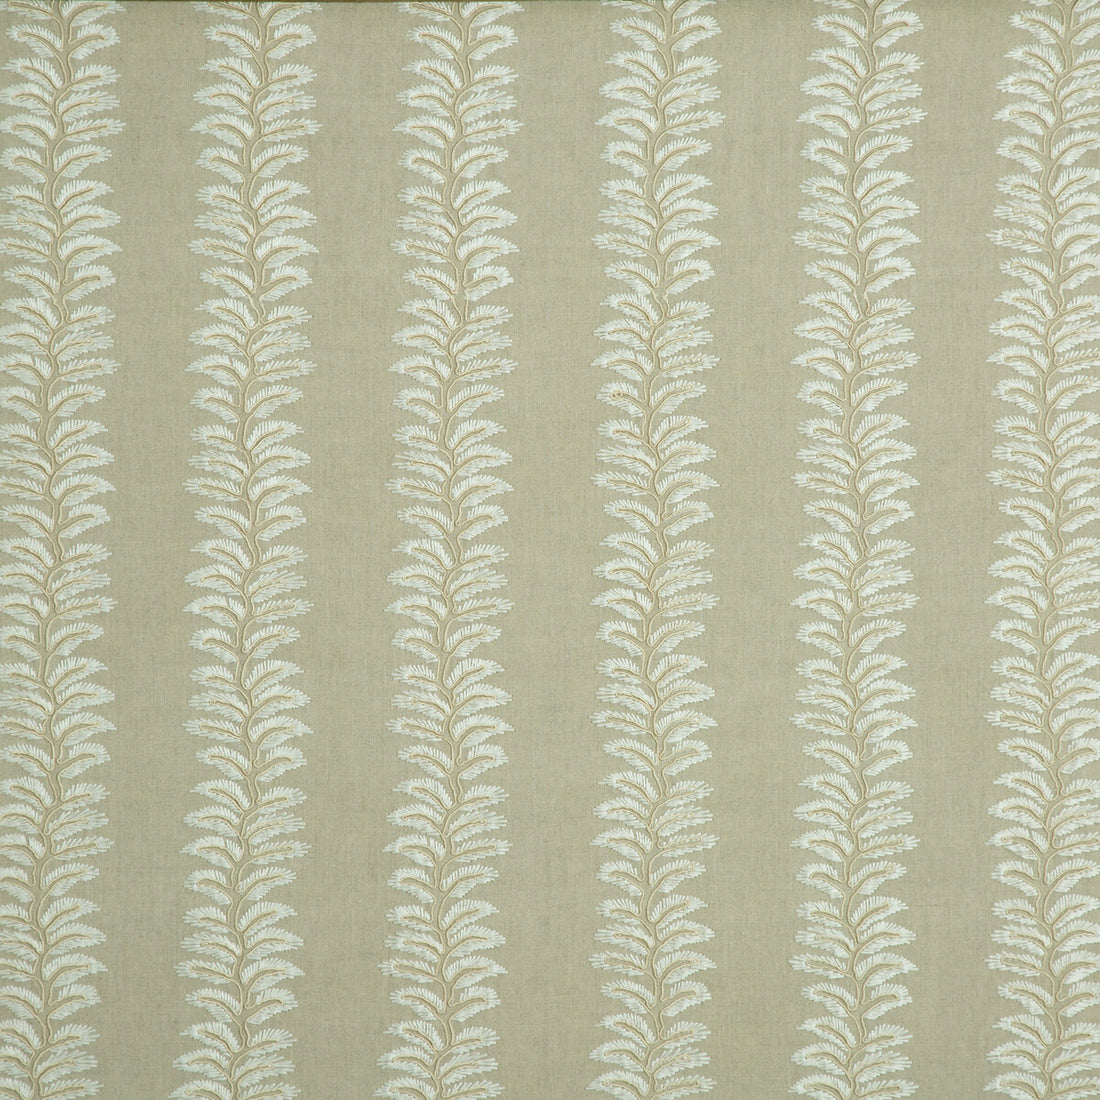 Bradbourne fabric in linen color - pattern BF10533.110.0 - by G P &amp; J Baker in the Langdale collection